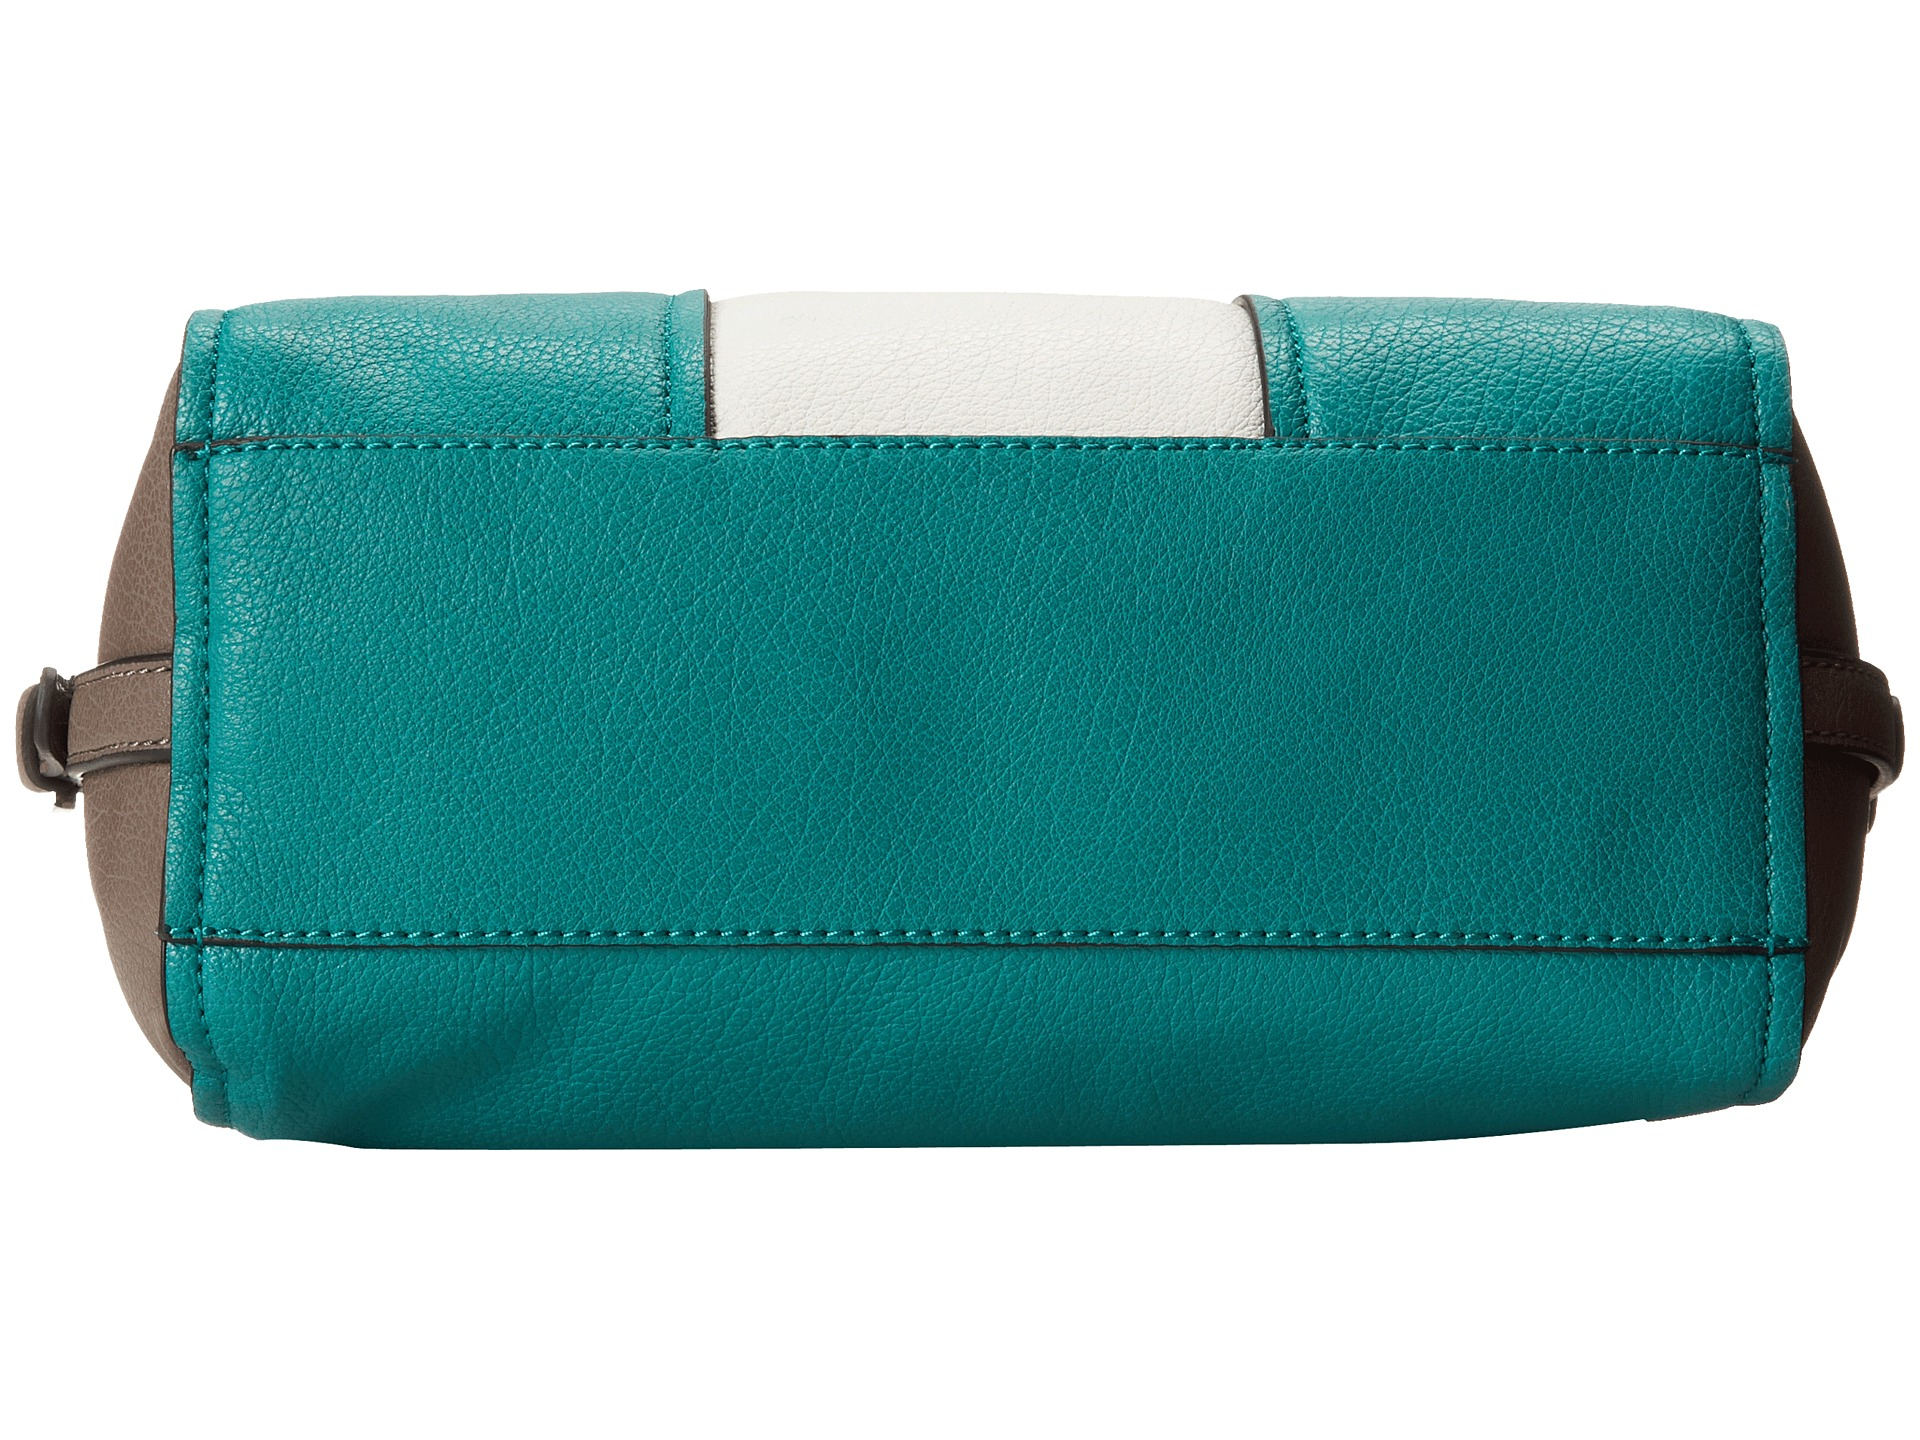 Lyst - Guess Confidential Avery Satchel in Green